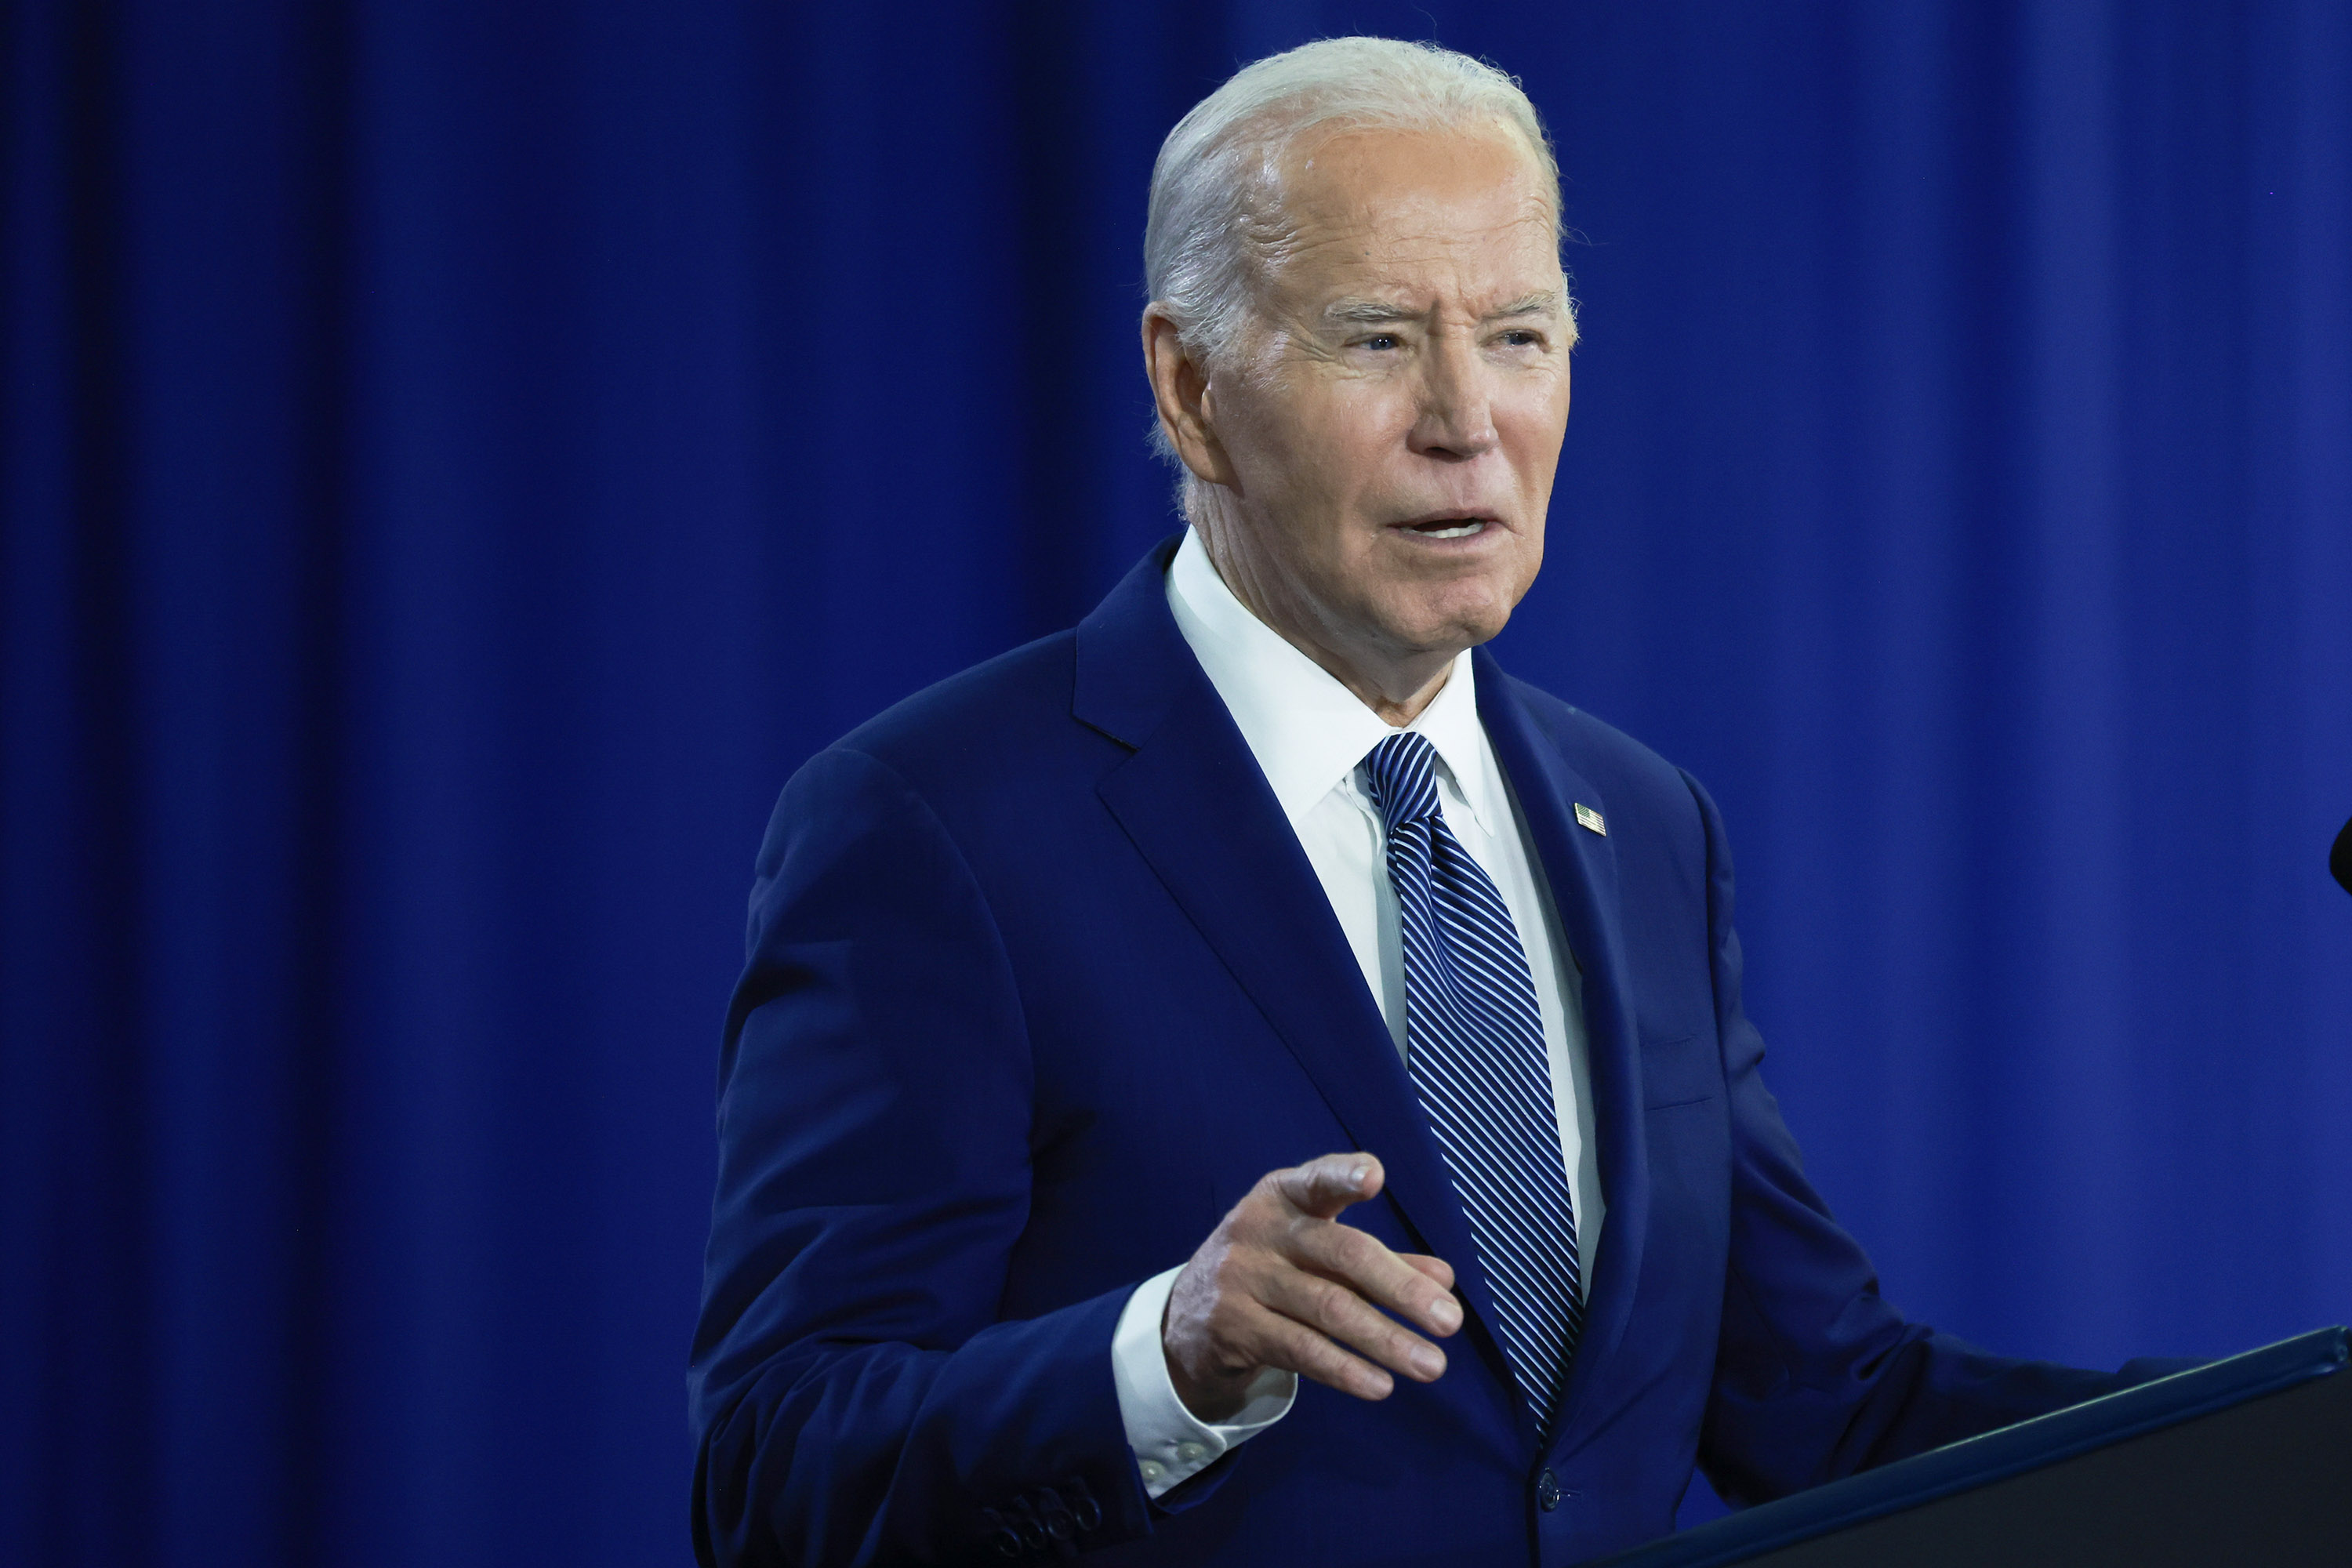 President Joe Biden speaks during a campaign stop in Tampa, Florida, on April 23.